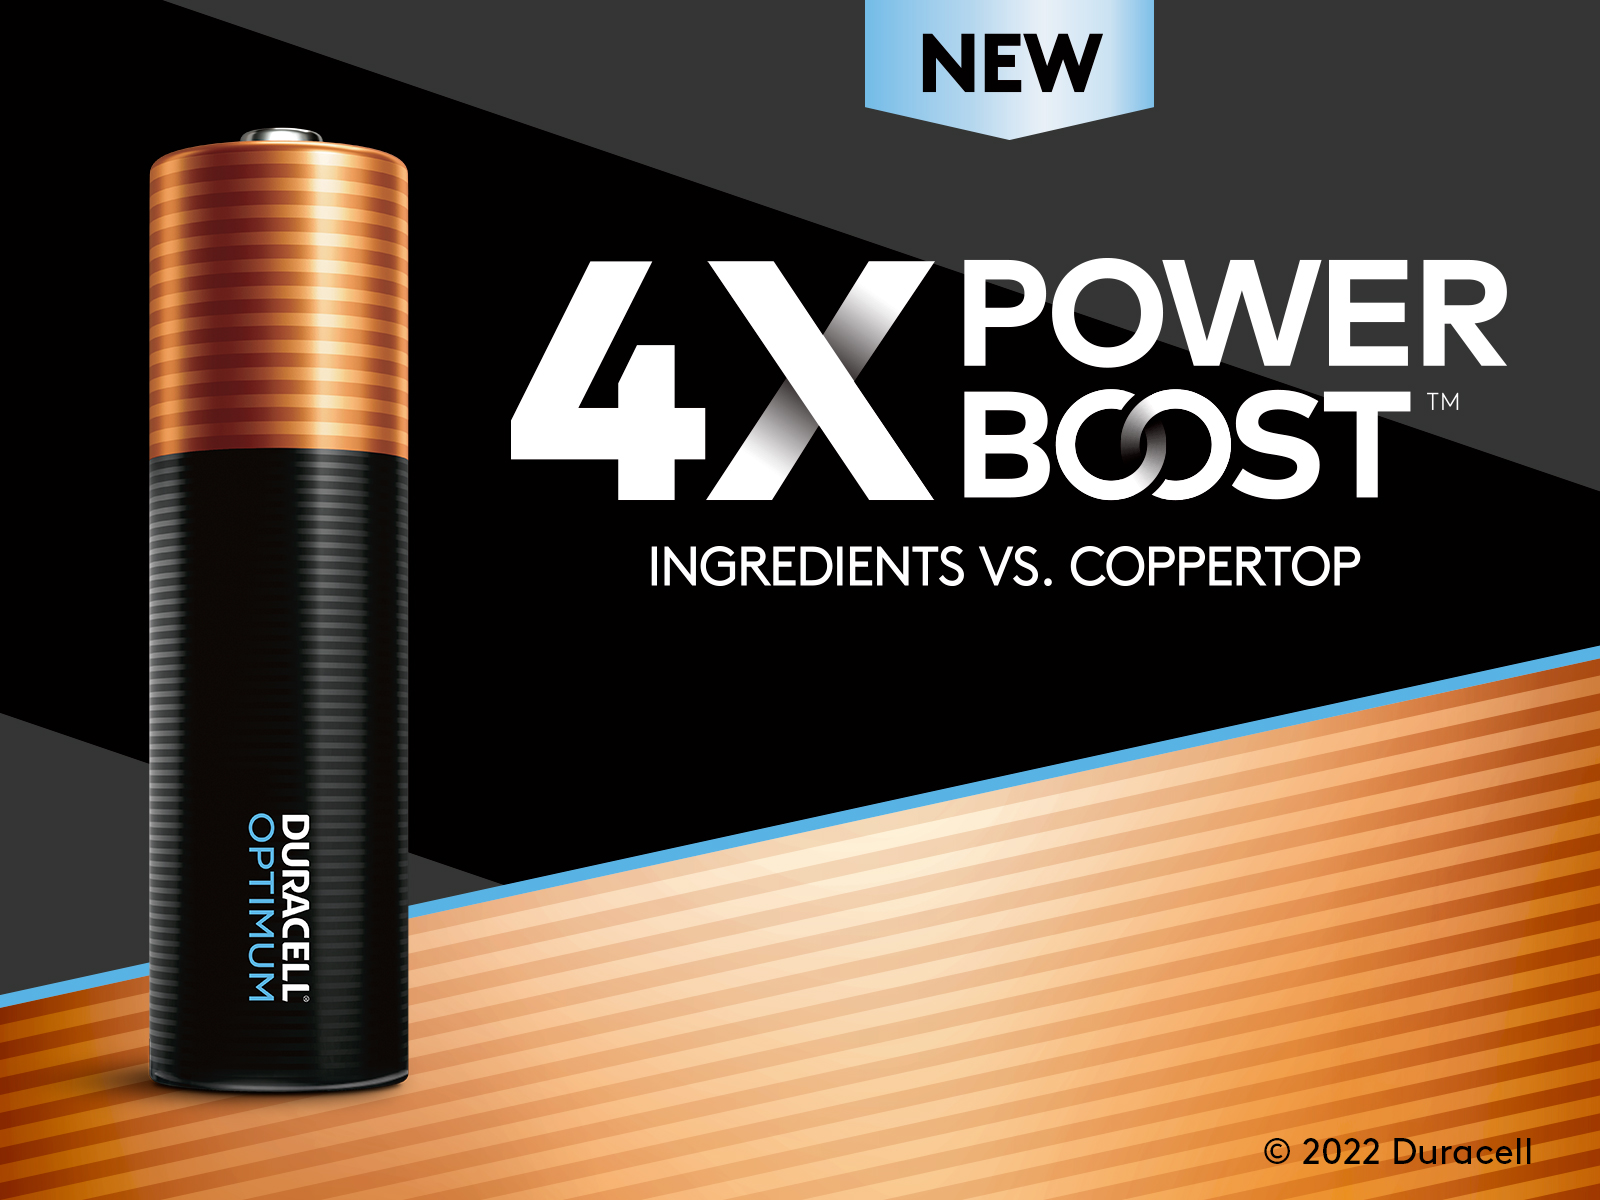 NEW Duracell AA/AAA batteries with Power Boost™ Ingredients. Save $3 On Any Duracell AA/AAA 6ct or larger at Publix.